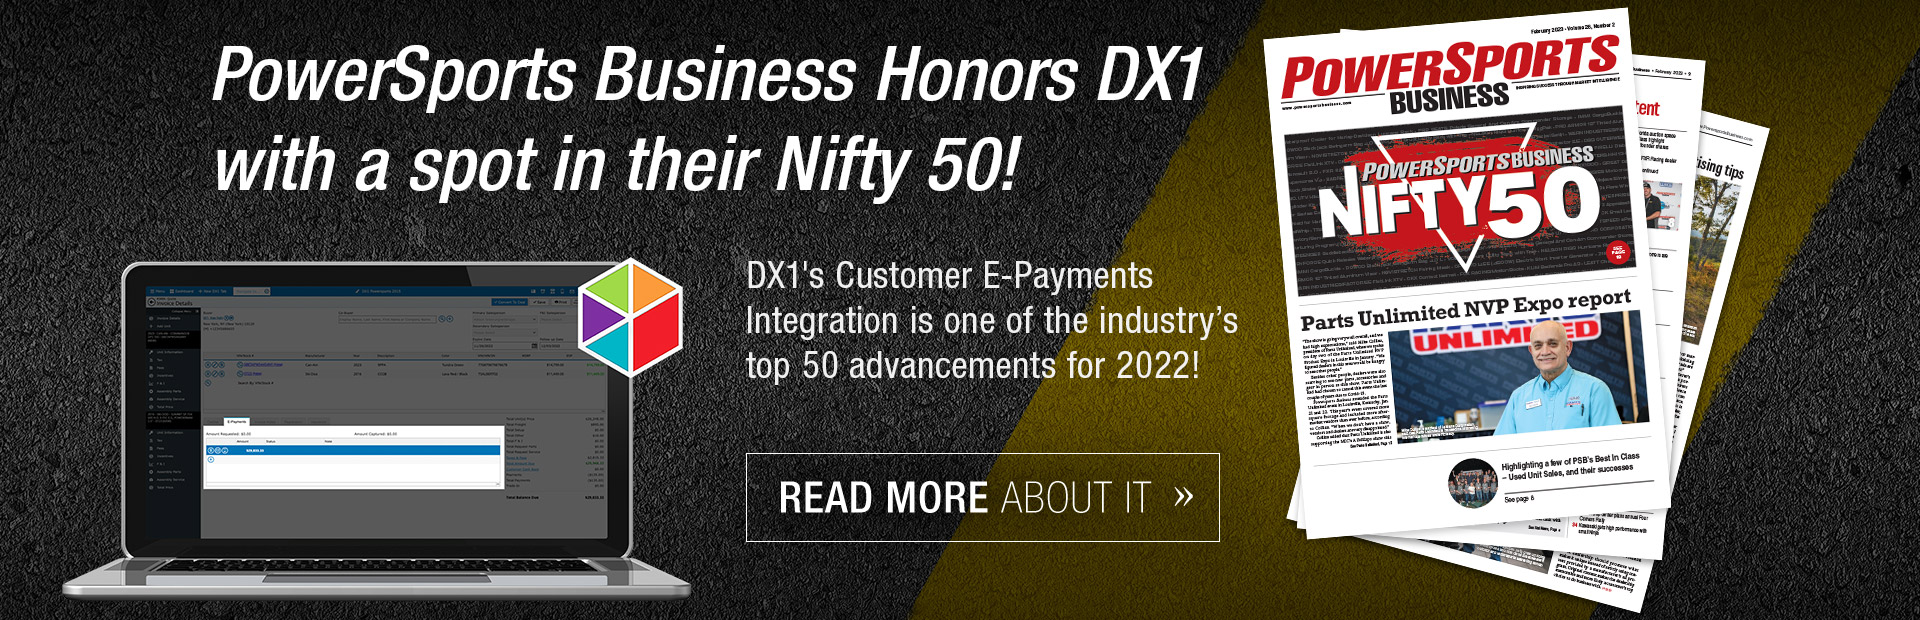 DX1 made the PSB Nifty50 2023